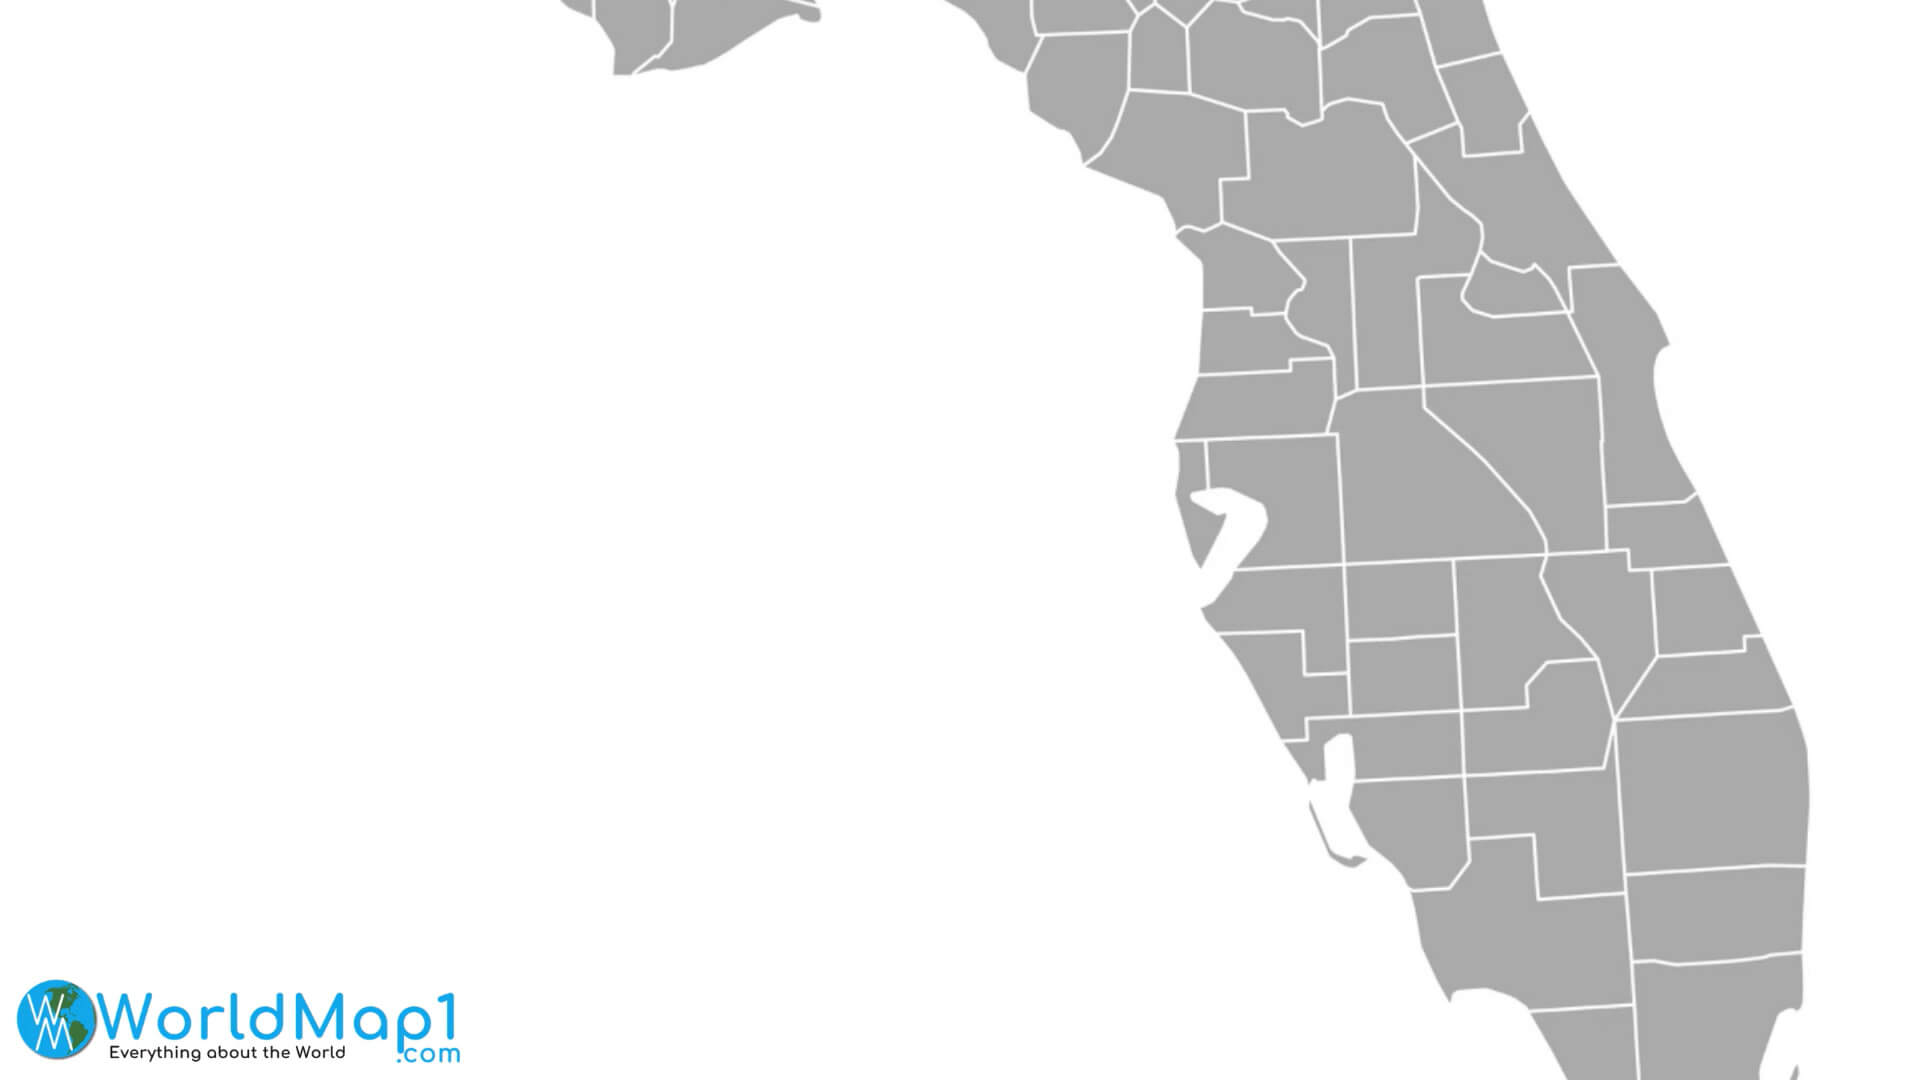 Blank Map of Florida